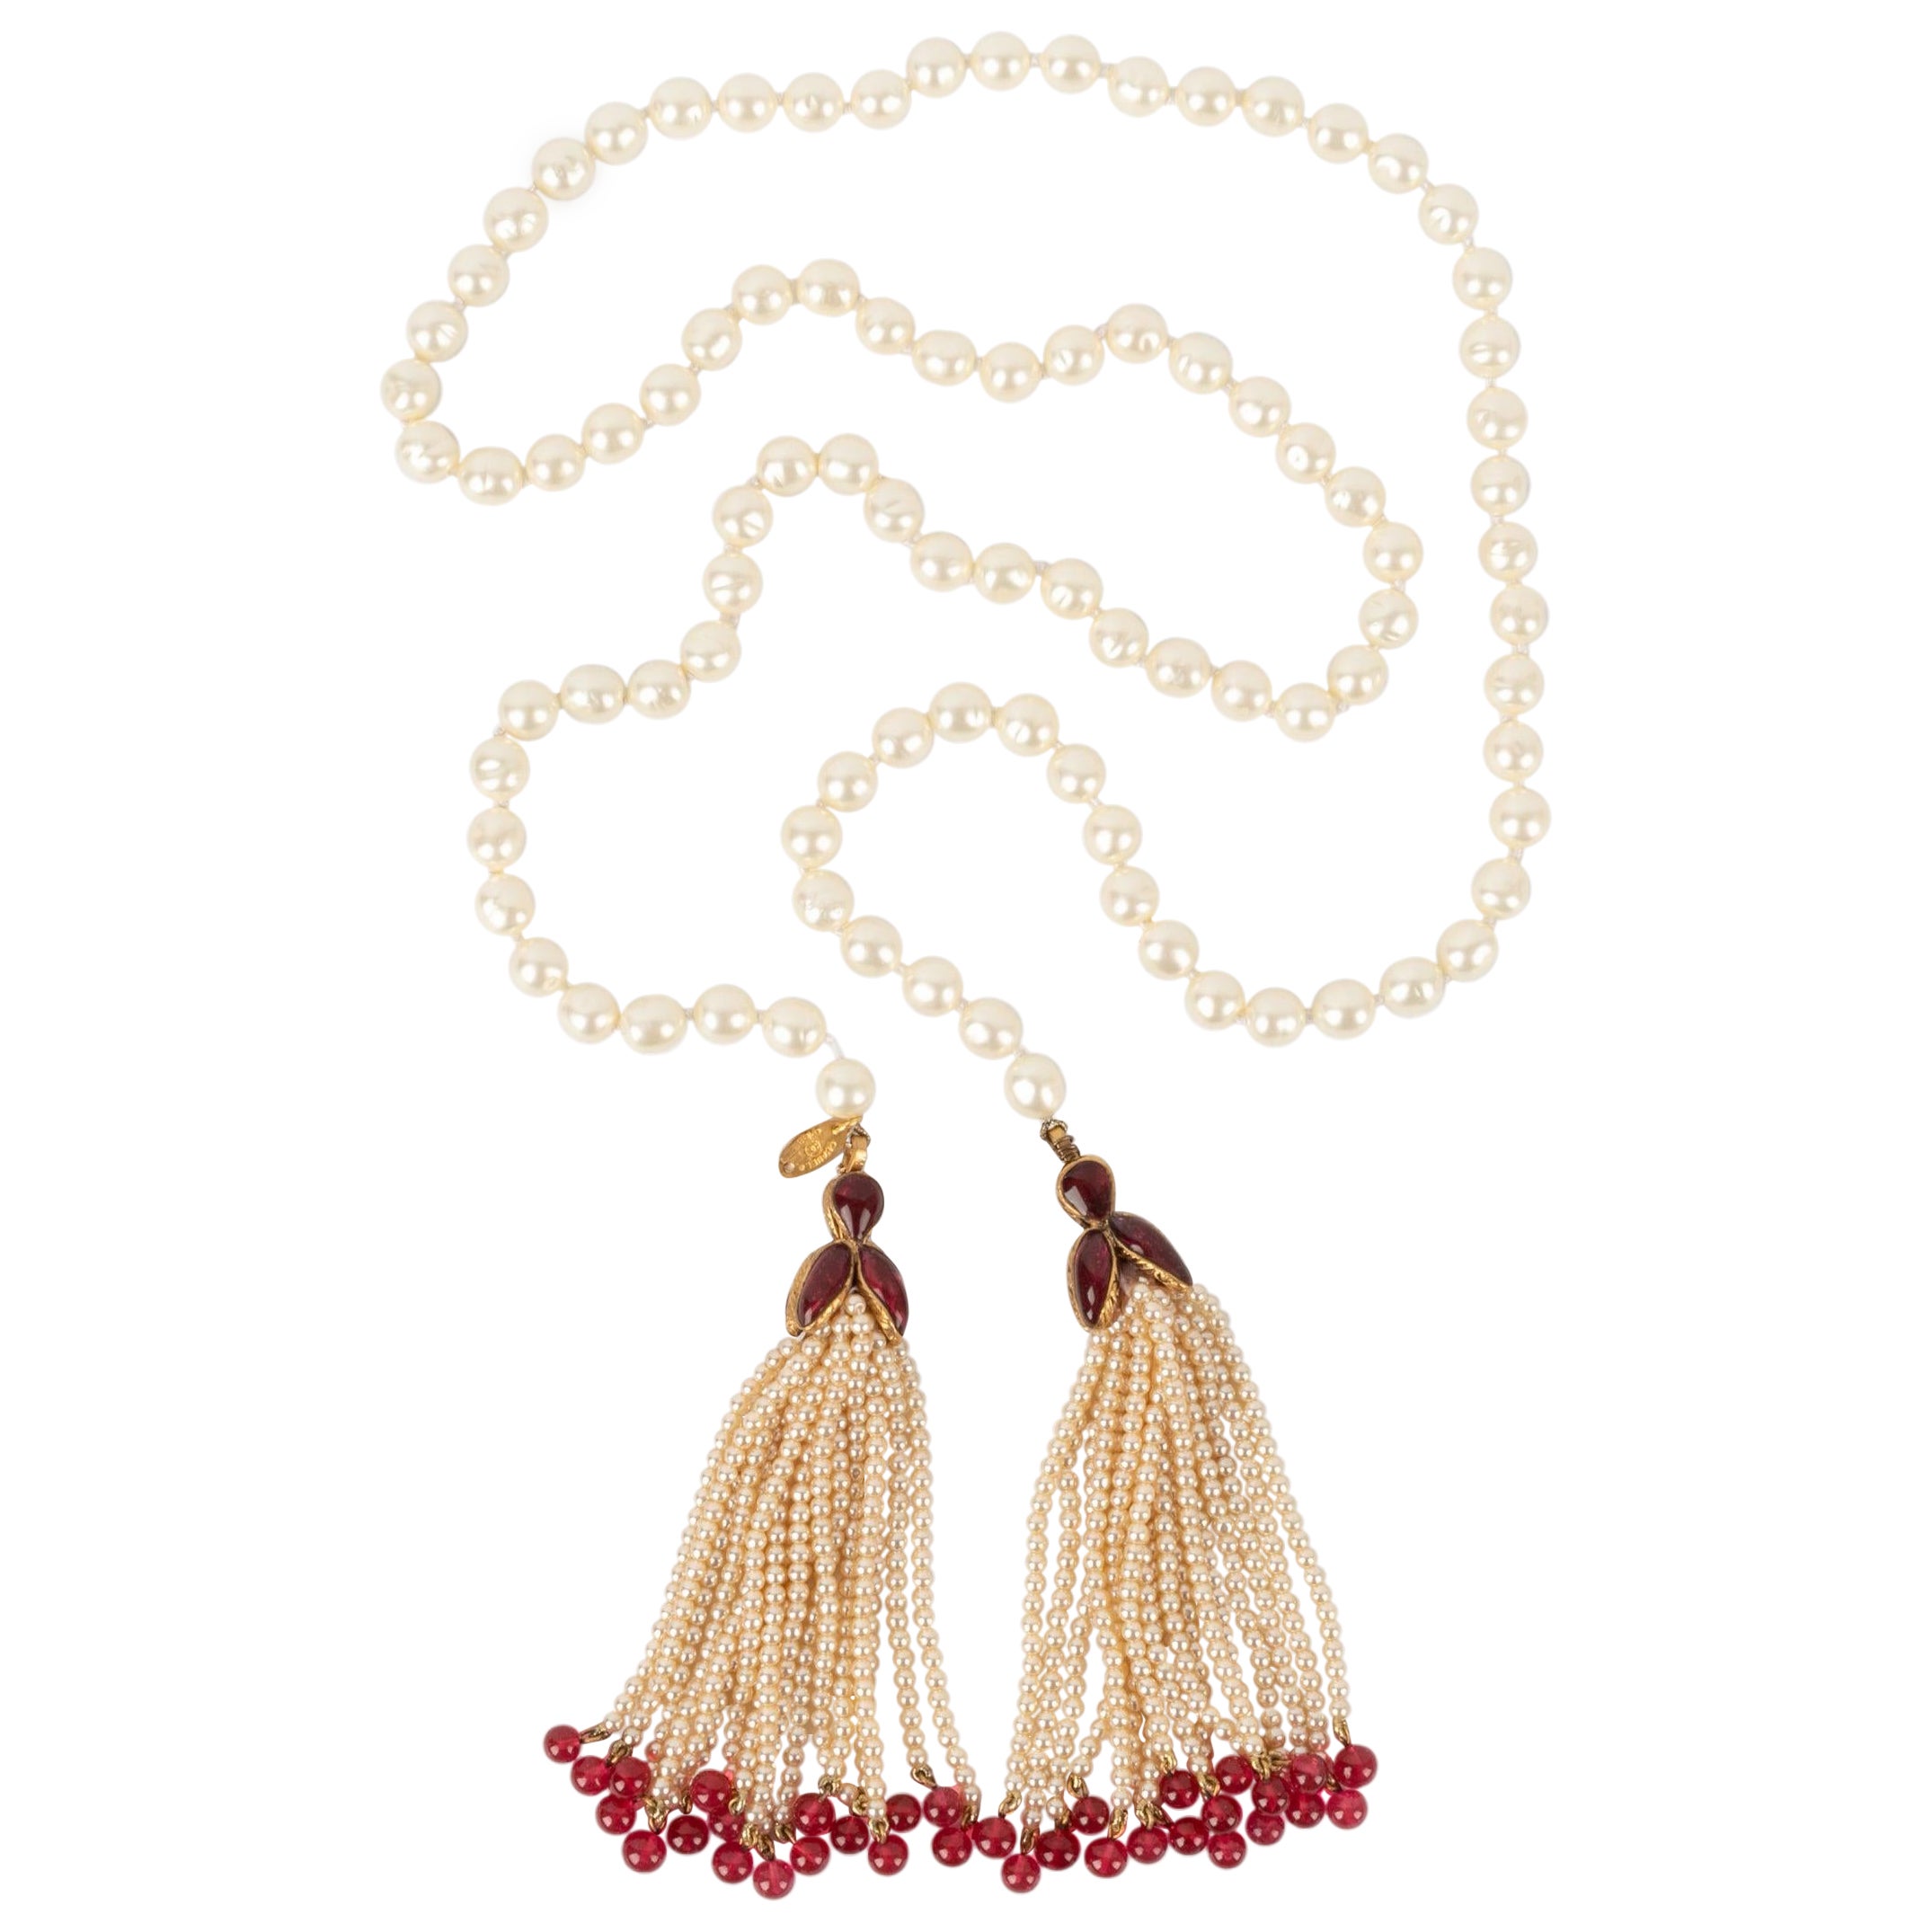 Chanel Tie Necklace with Knot Assembled Costume Pearls, 1983 For Sale